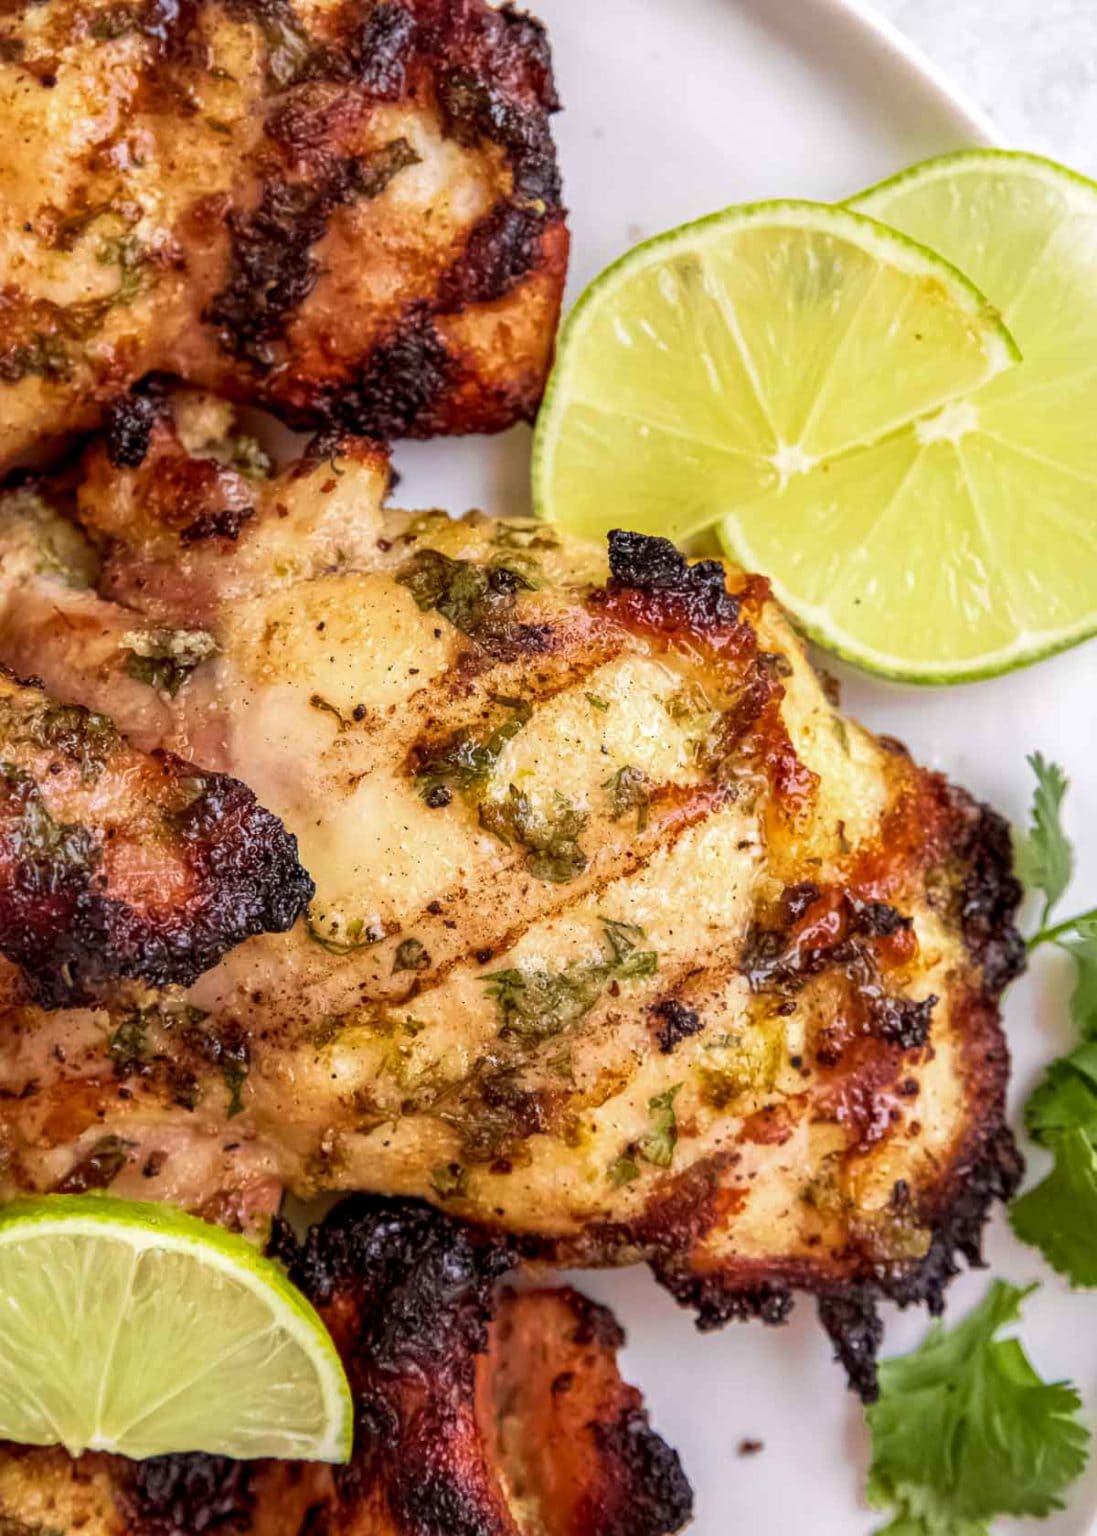 Juicy Grilled Chicken Thighs - The Best Keto Recipes